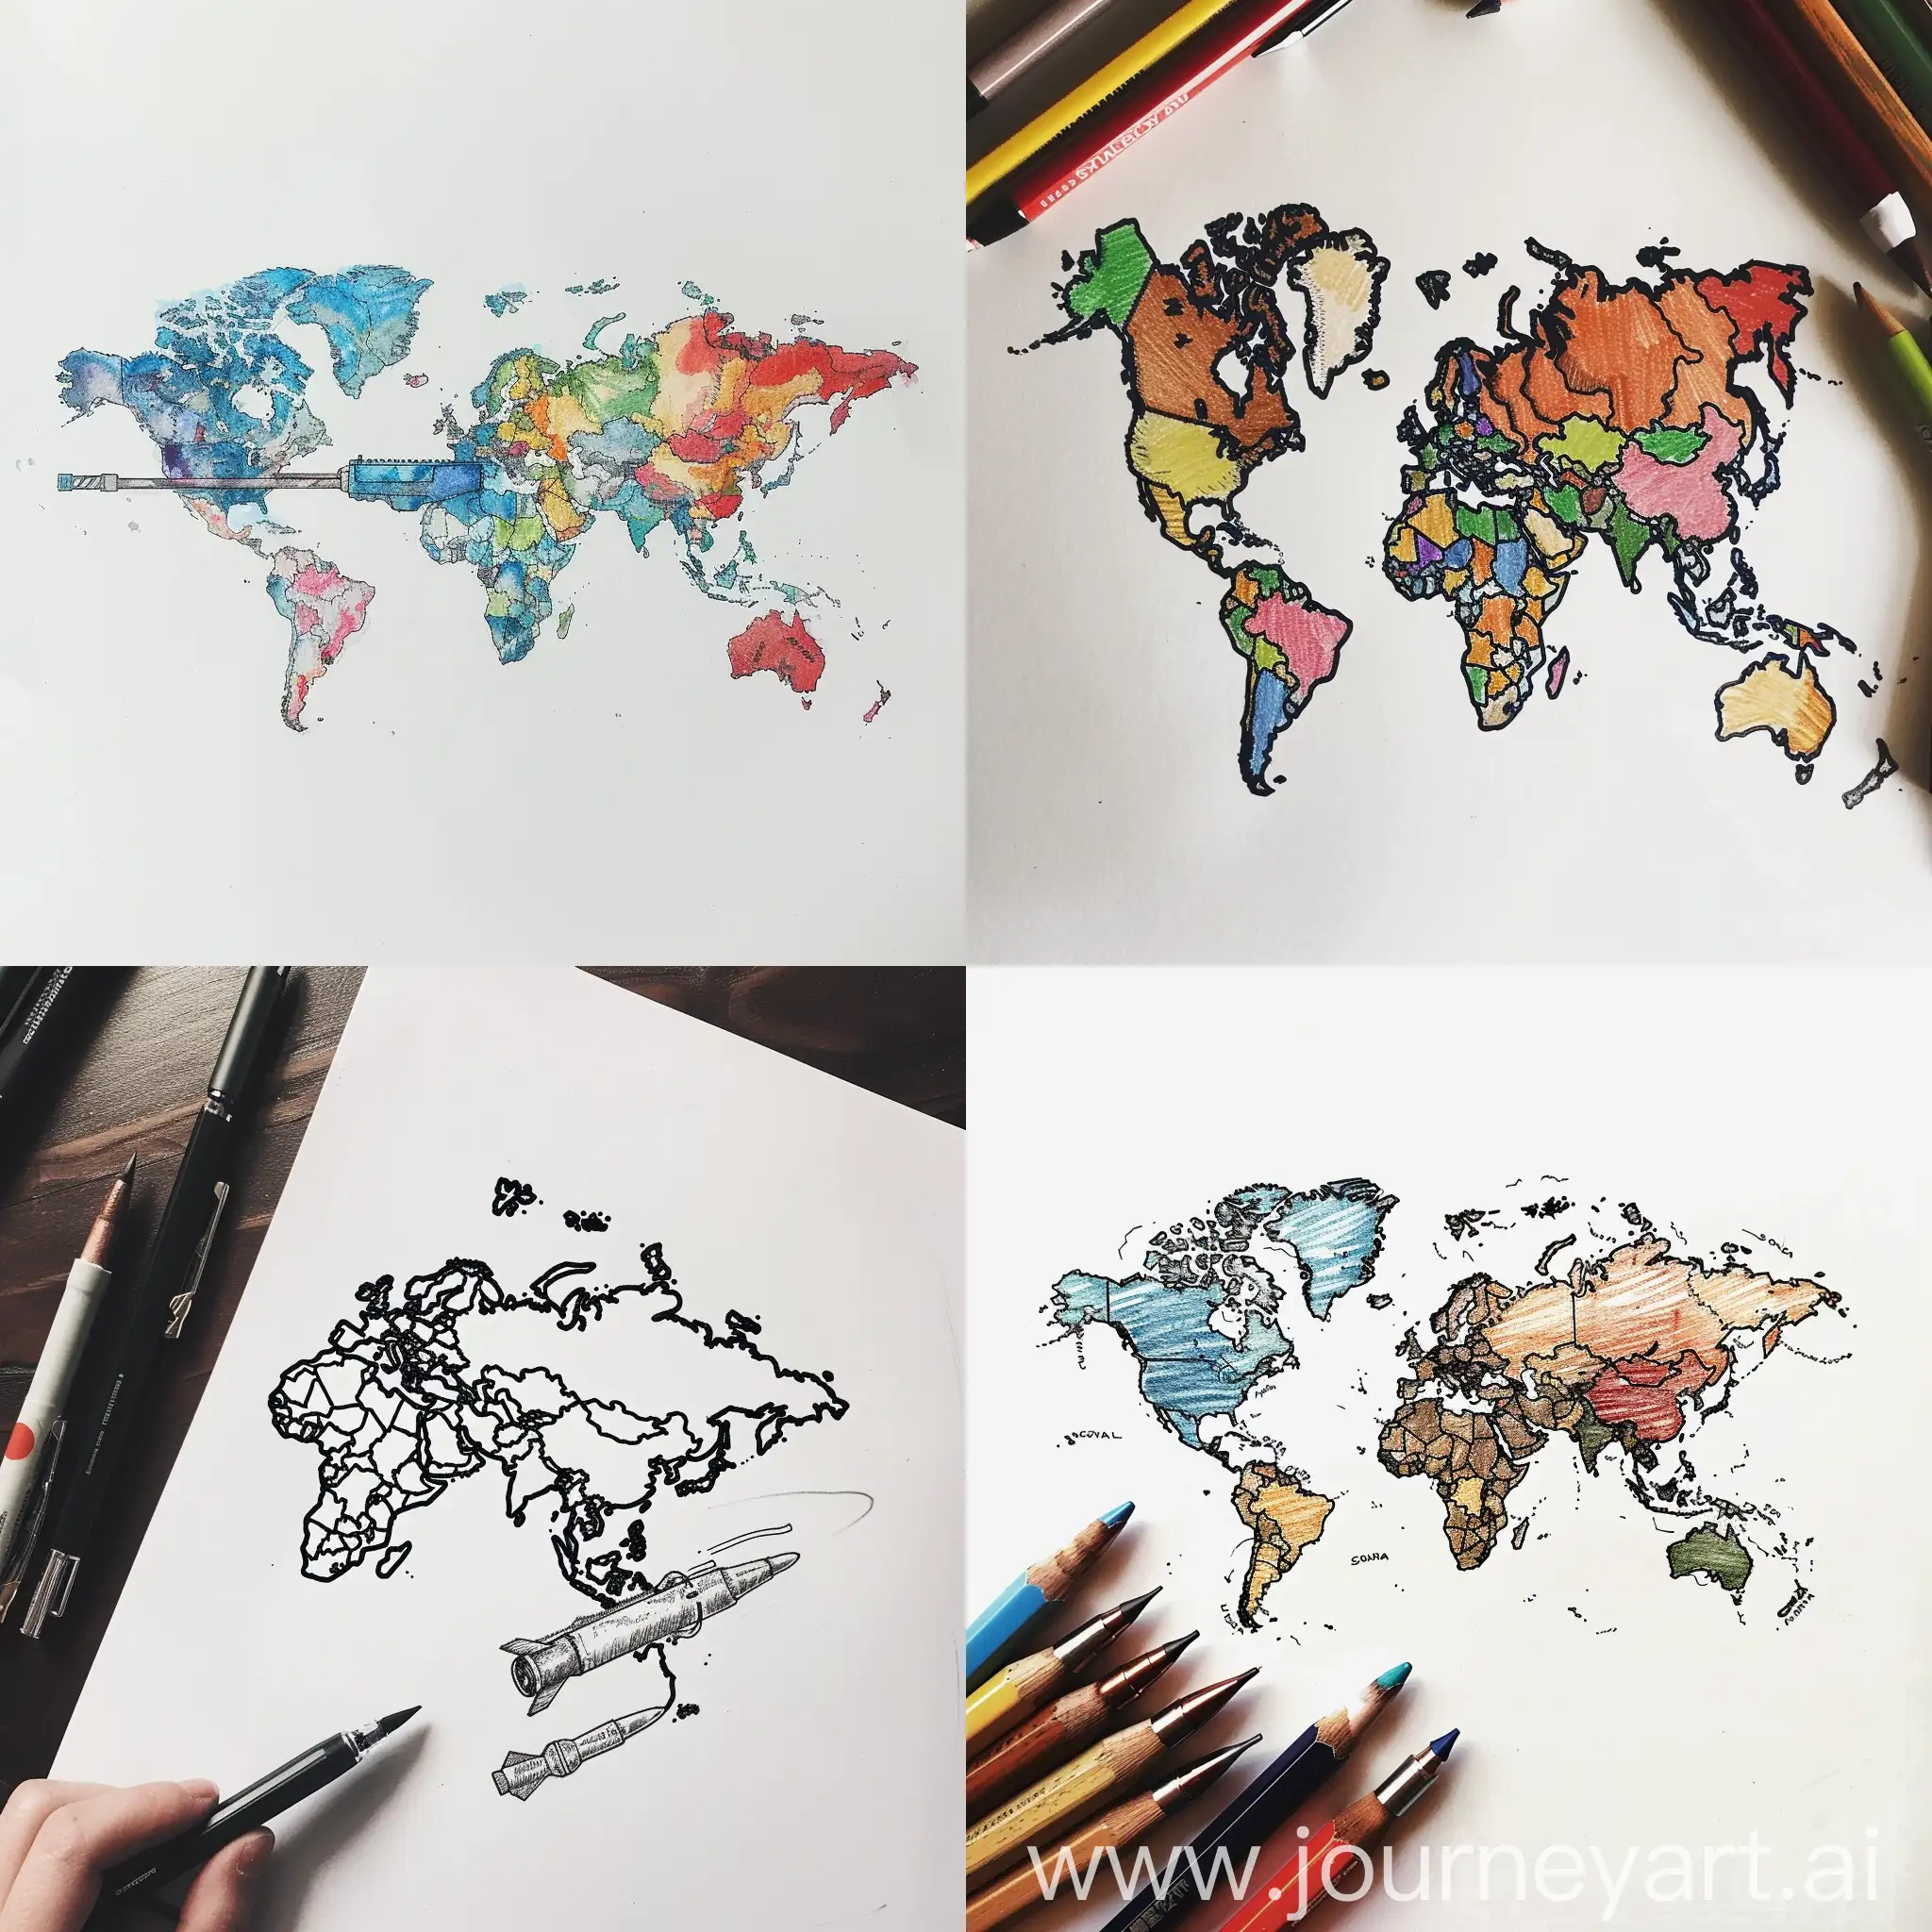 draw countries as weapons